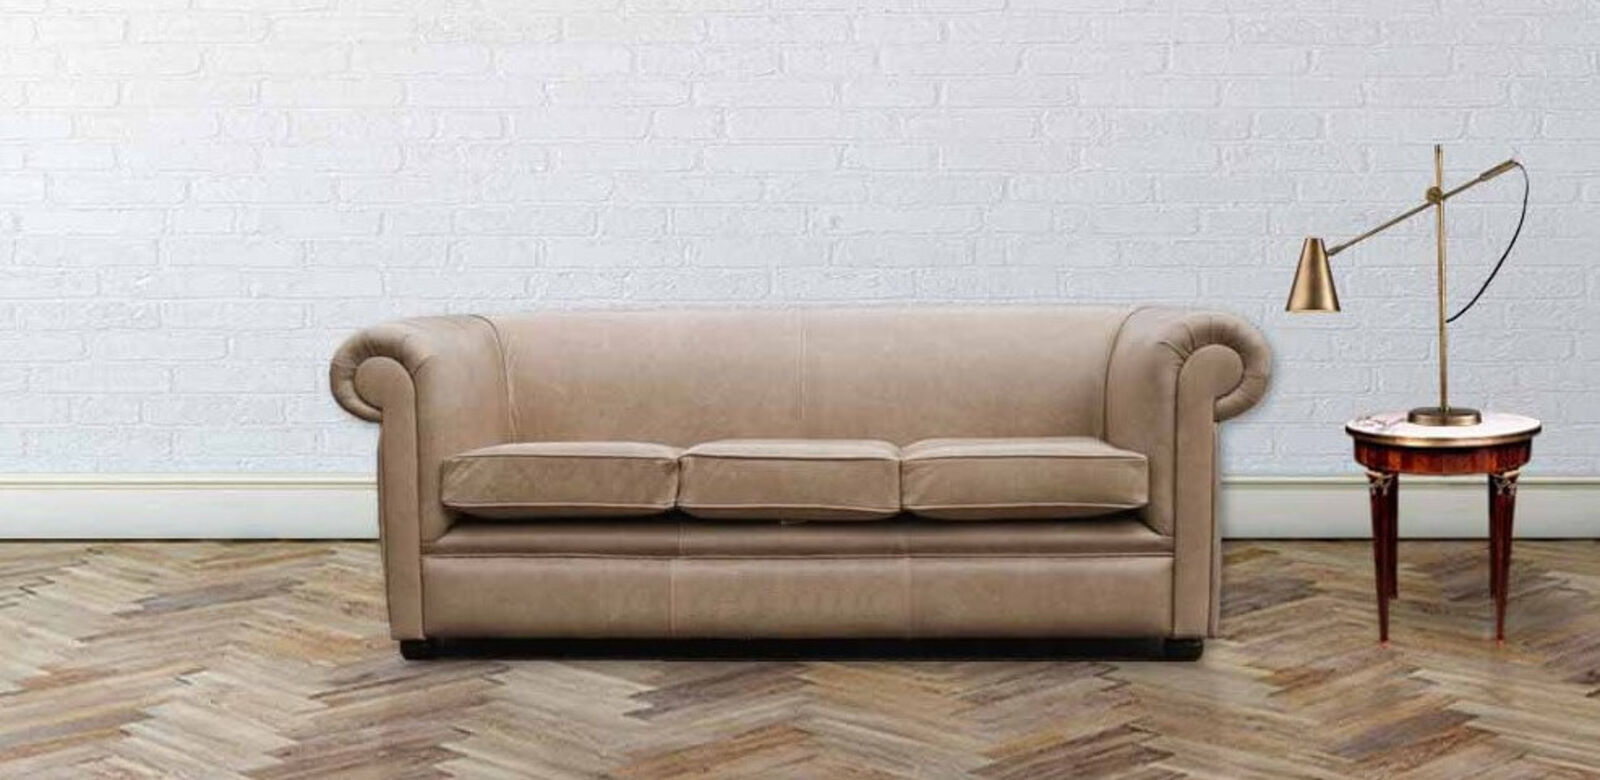 Product photograph of Chesterfield 1930 3 Seater Settee Old English Parchment Leather Sofa from Designer Sofas 4U